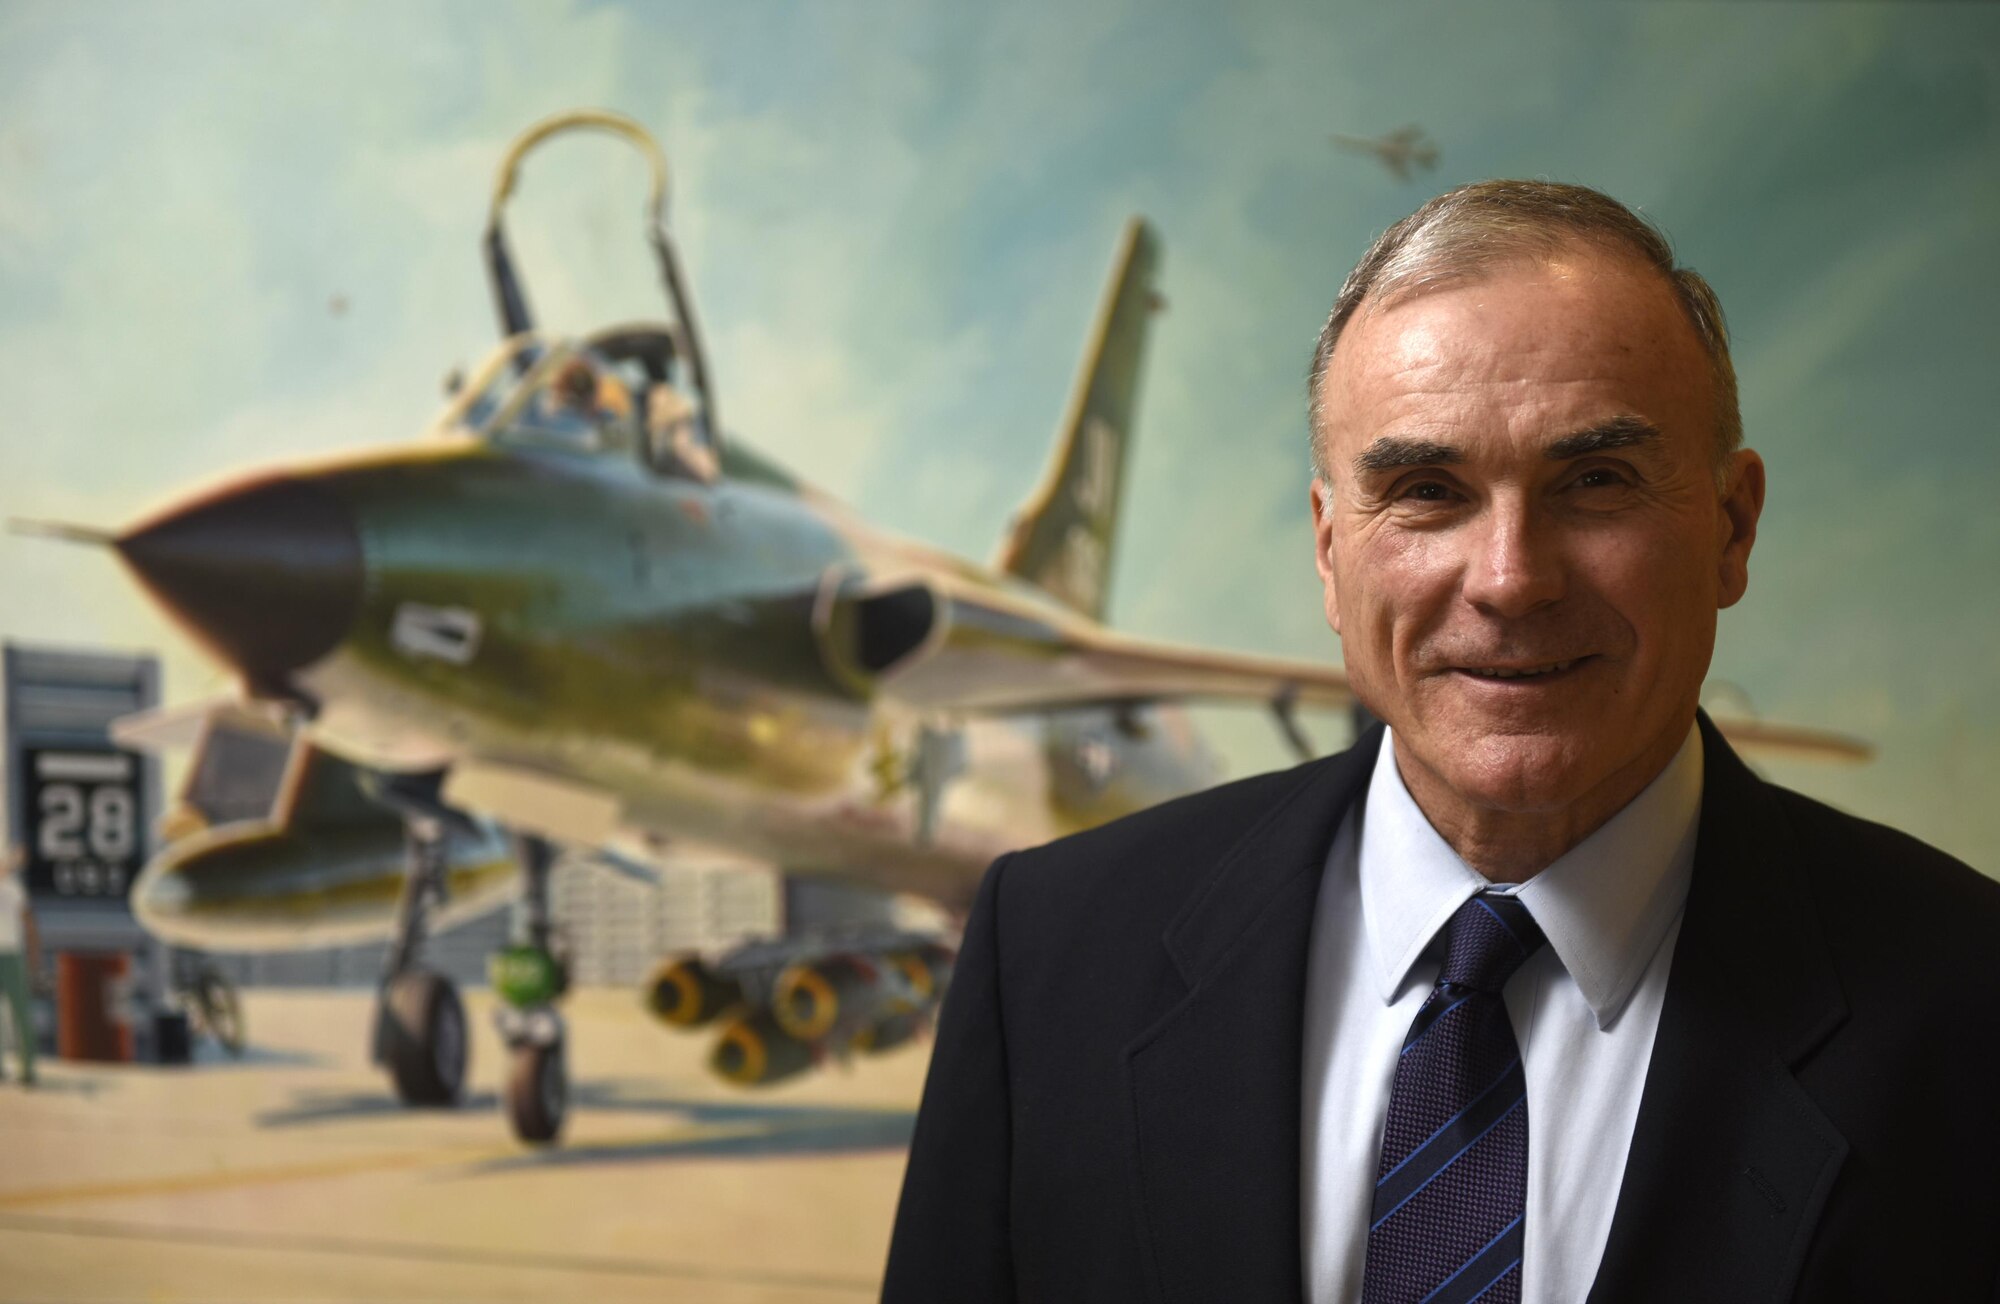 Donald Allen, a senior analyst and Vietnam veteran, served as an AT-28 Trojan pilot assigned to the 56th Special Operations Wing, said he was excited about the art exhibit opening of the 50th commemoration of the Vietnam War in the Air Force Art Gallery located in the Pentagon, Washington, D.C., May 26, 2016. (U.S. Air Force photo/Tech. Sgt. Joshua L. DeMotts)